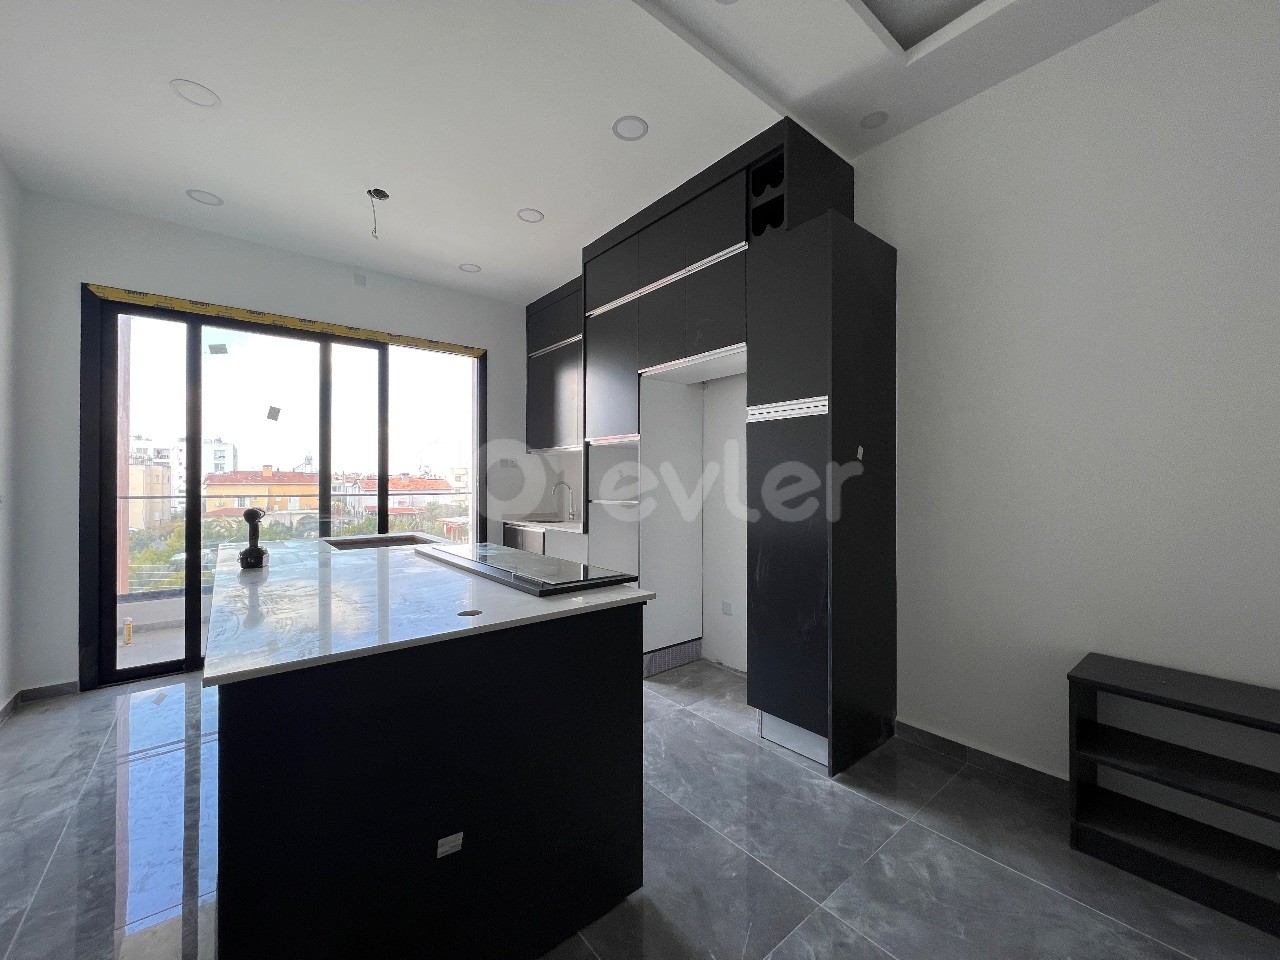 2+1 ENSUITE LUXURY APARTMENT IN LEFKOŞA/GÖNYELI AREA WITH PRICES STARTING FROM 66,400 GBP